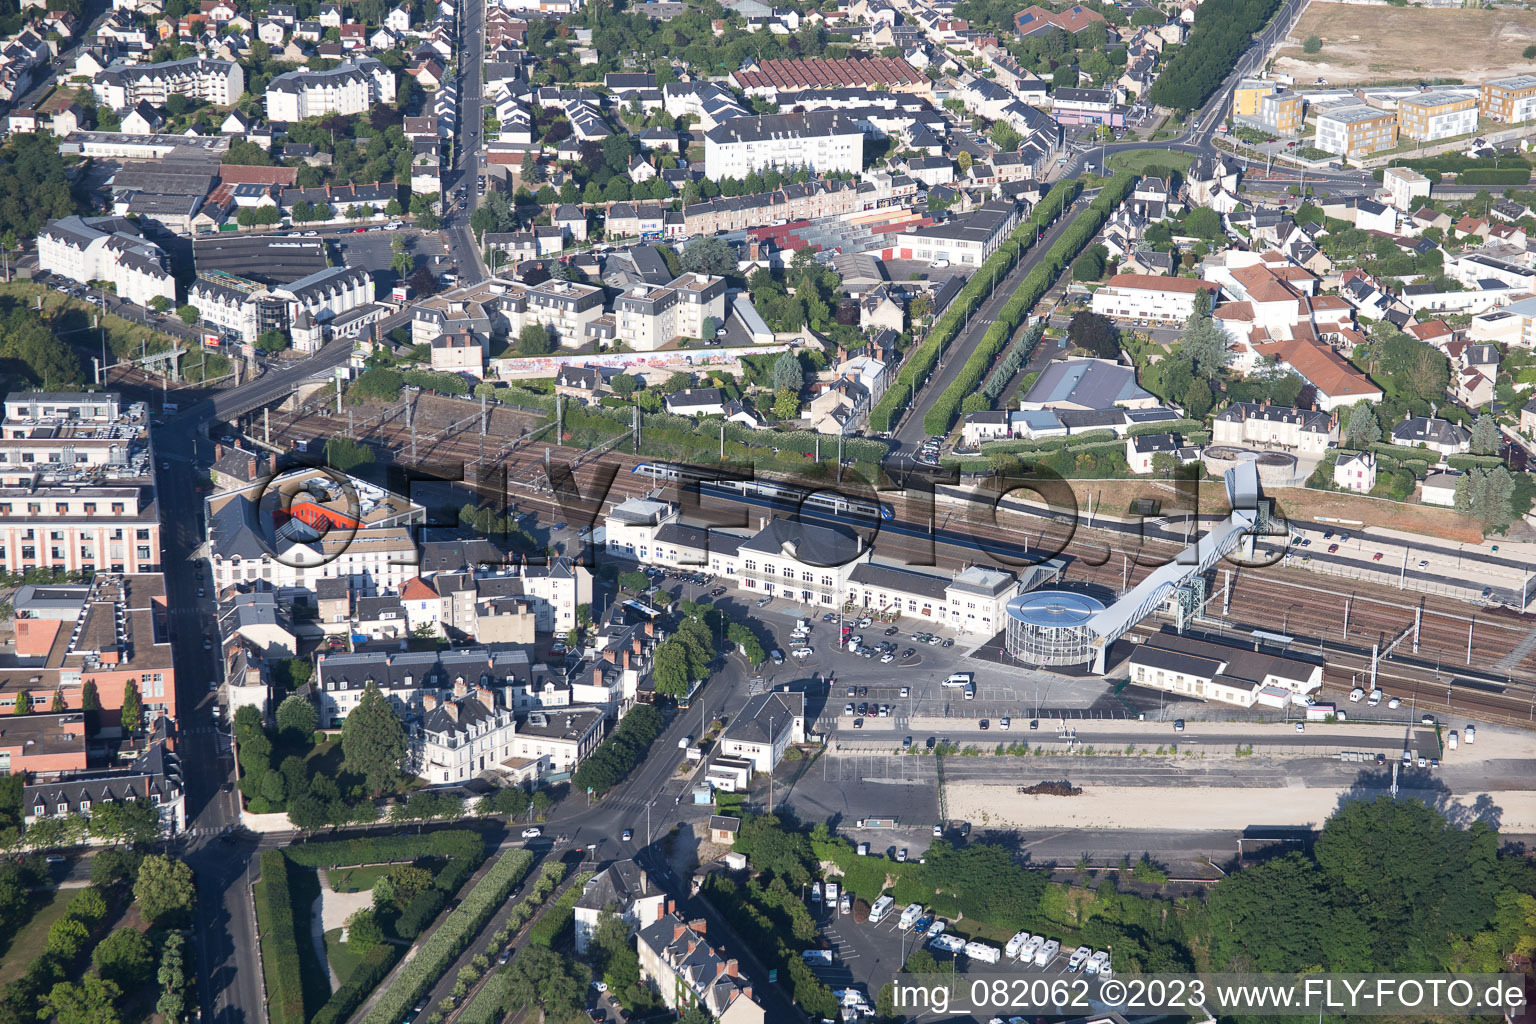 Aerial photograpy of Blois in the state Loir et Cher, France